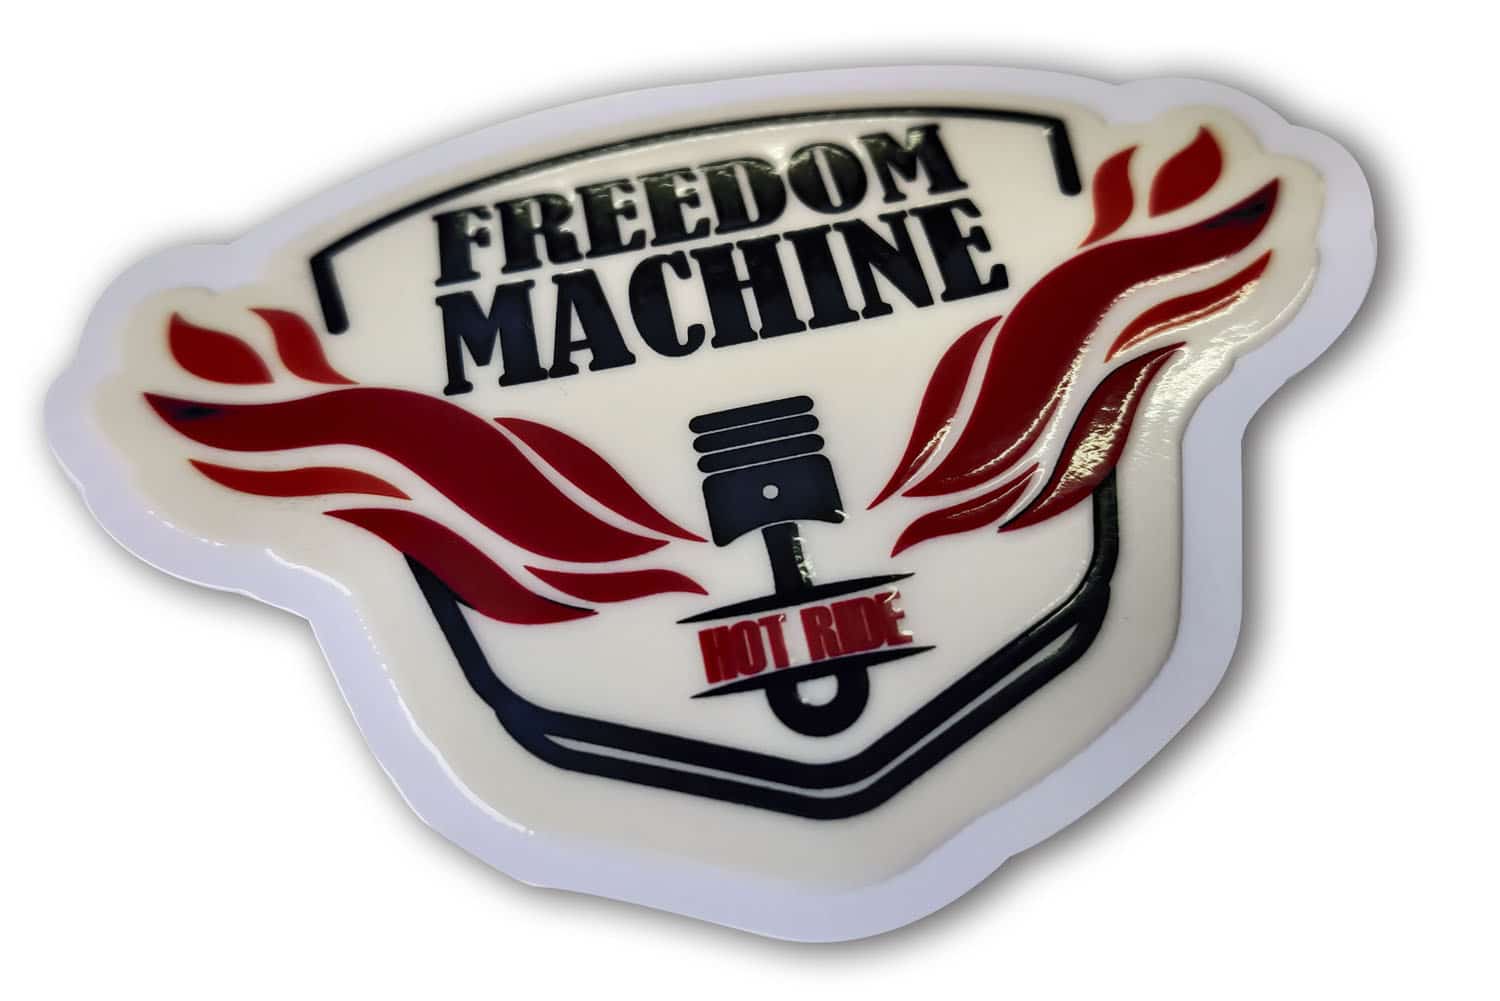 Shape cut sticker of the ‘Freedom’ brand logo given a raised, embossed effect using a UV ink coat